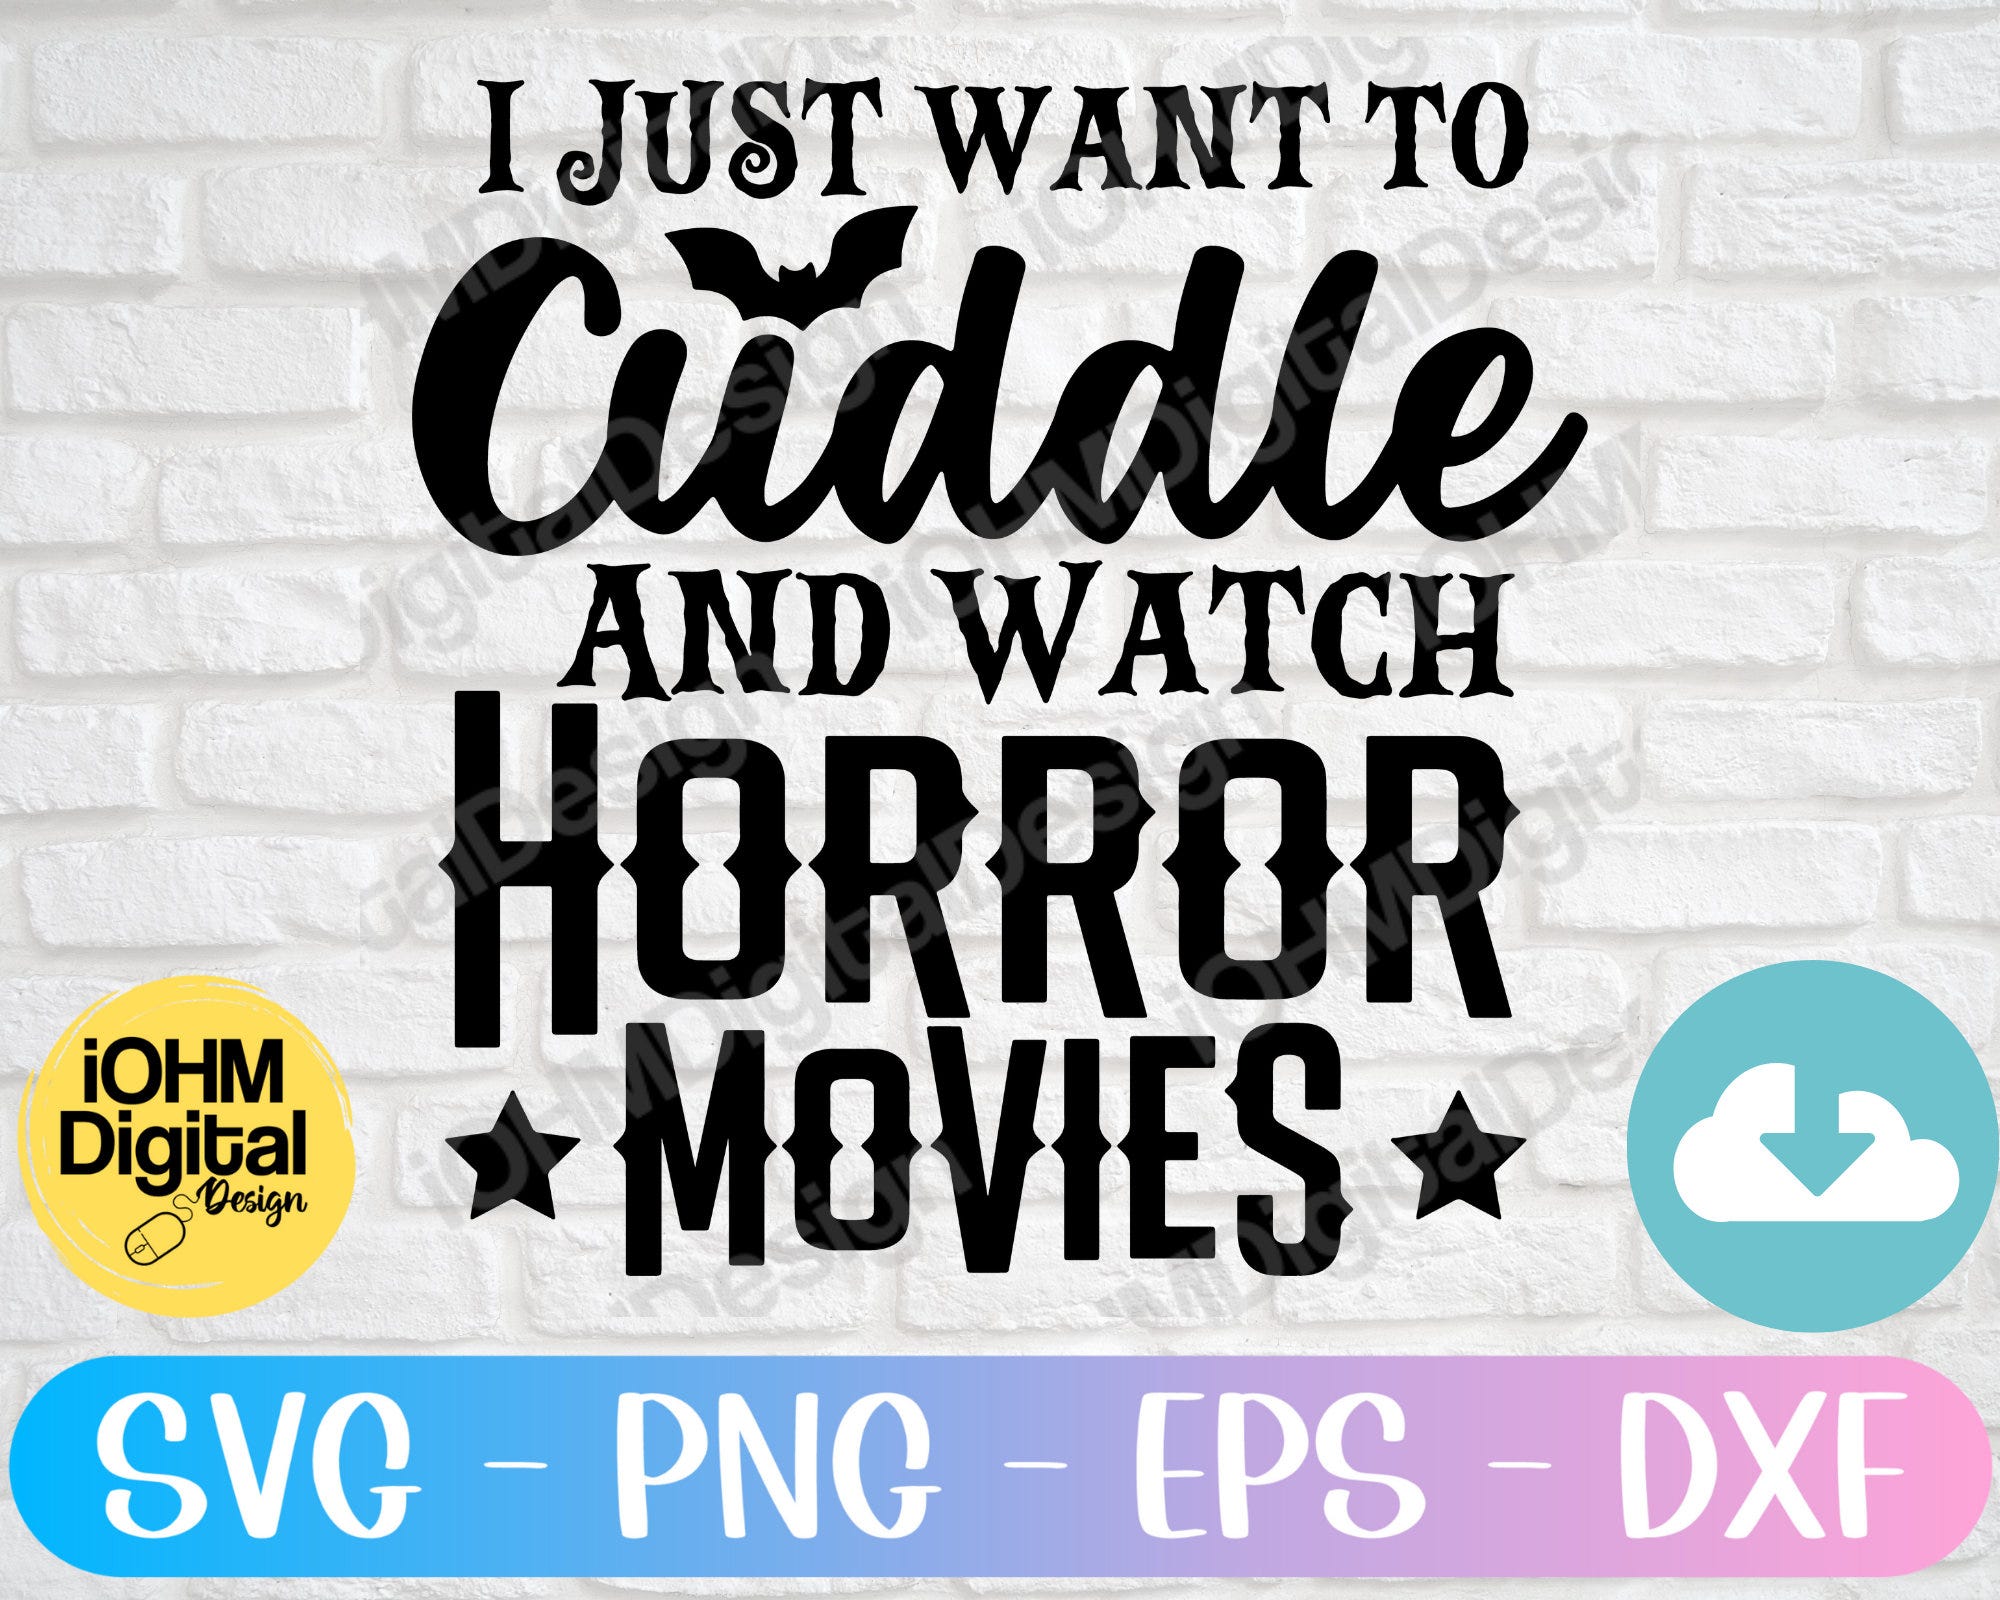 I Just Want To Cuddle And Watch Horror Movies Svg Png Eps Dxf Cut File | Halloween Svg | Scary Halloween Movies Svg | Halloween Shirt Svg